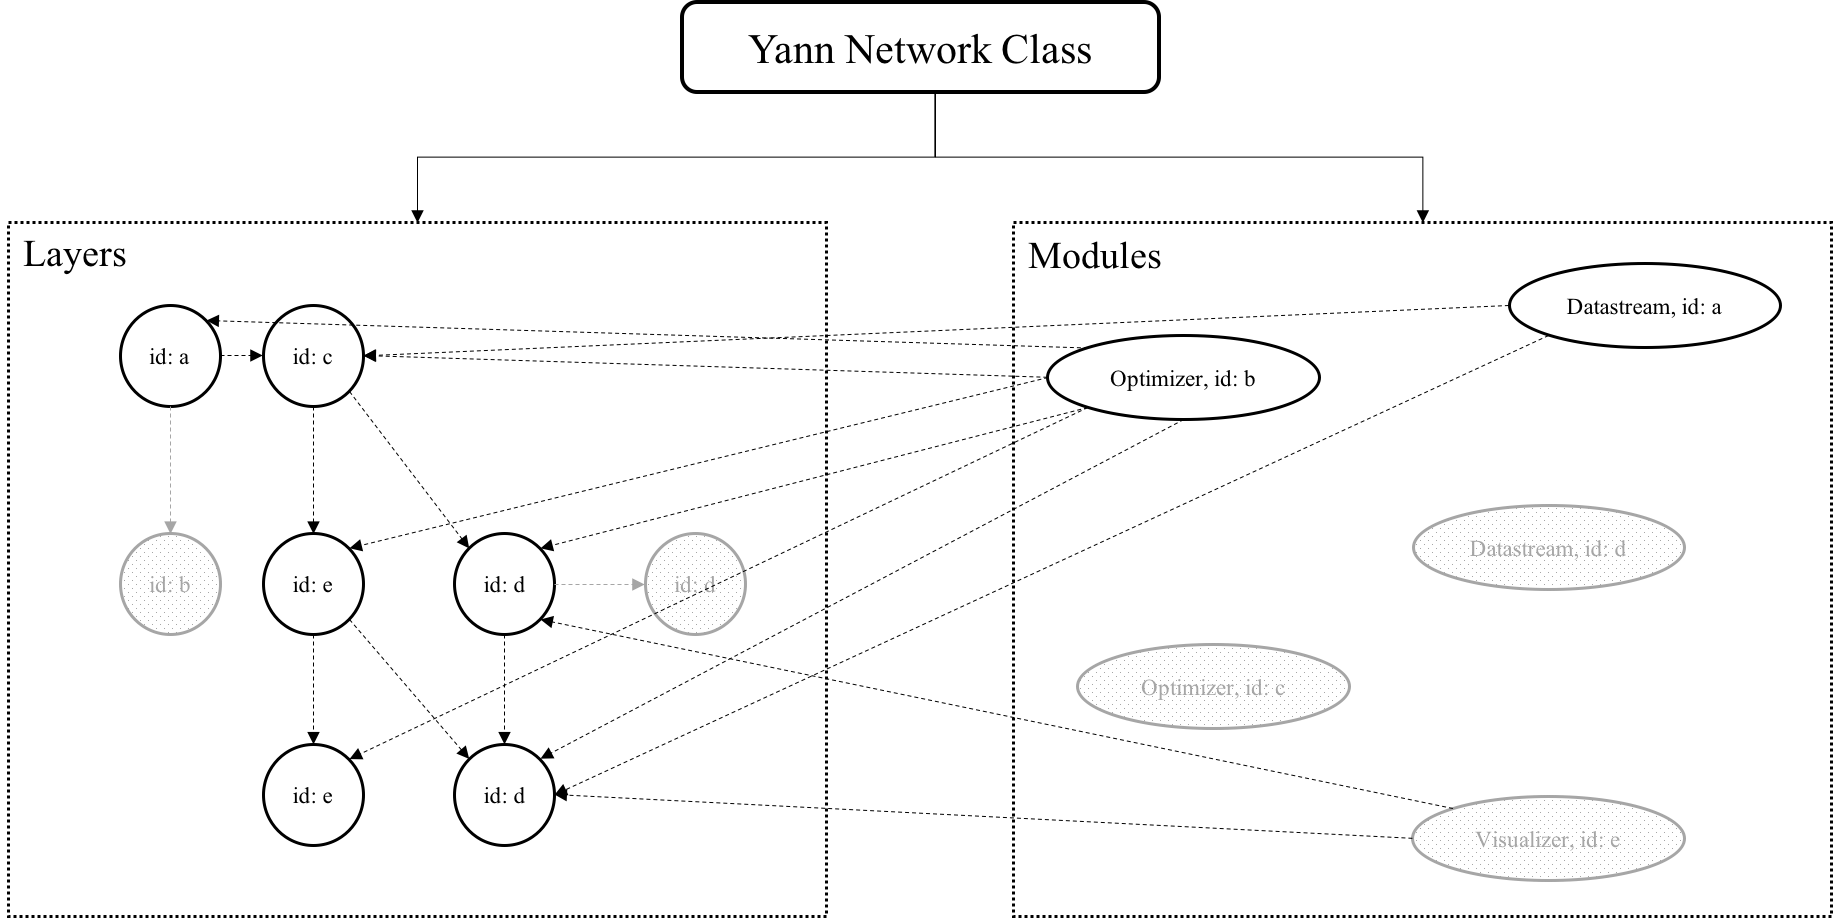 A cooked network. The objects that are in gray and are shaded are uncooked parts of the network.